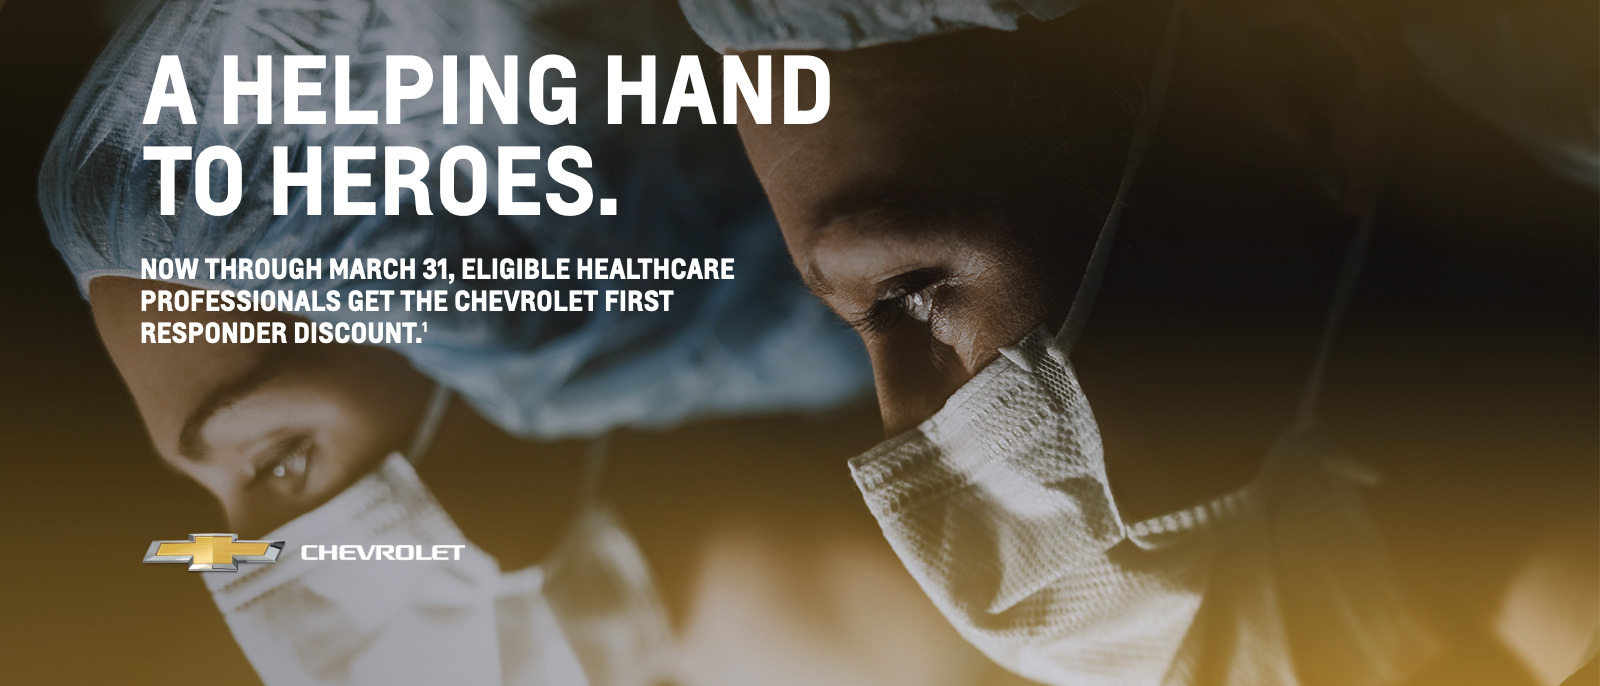 Health Care Providers Now Eligible For Chevrolet First Responder Discount